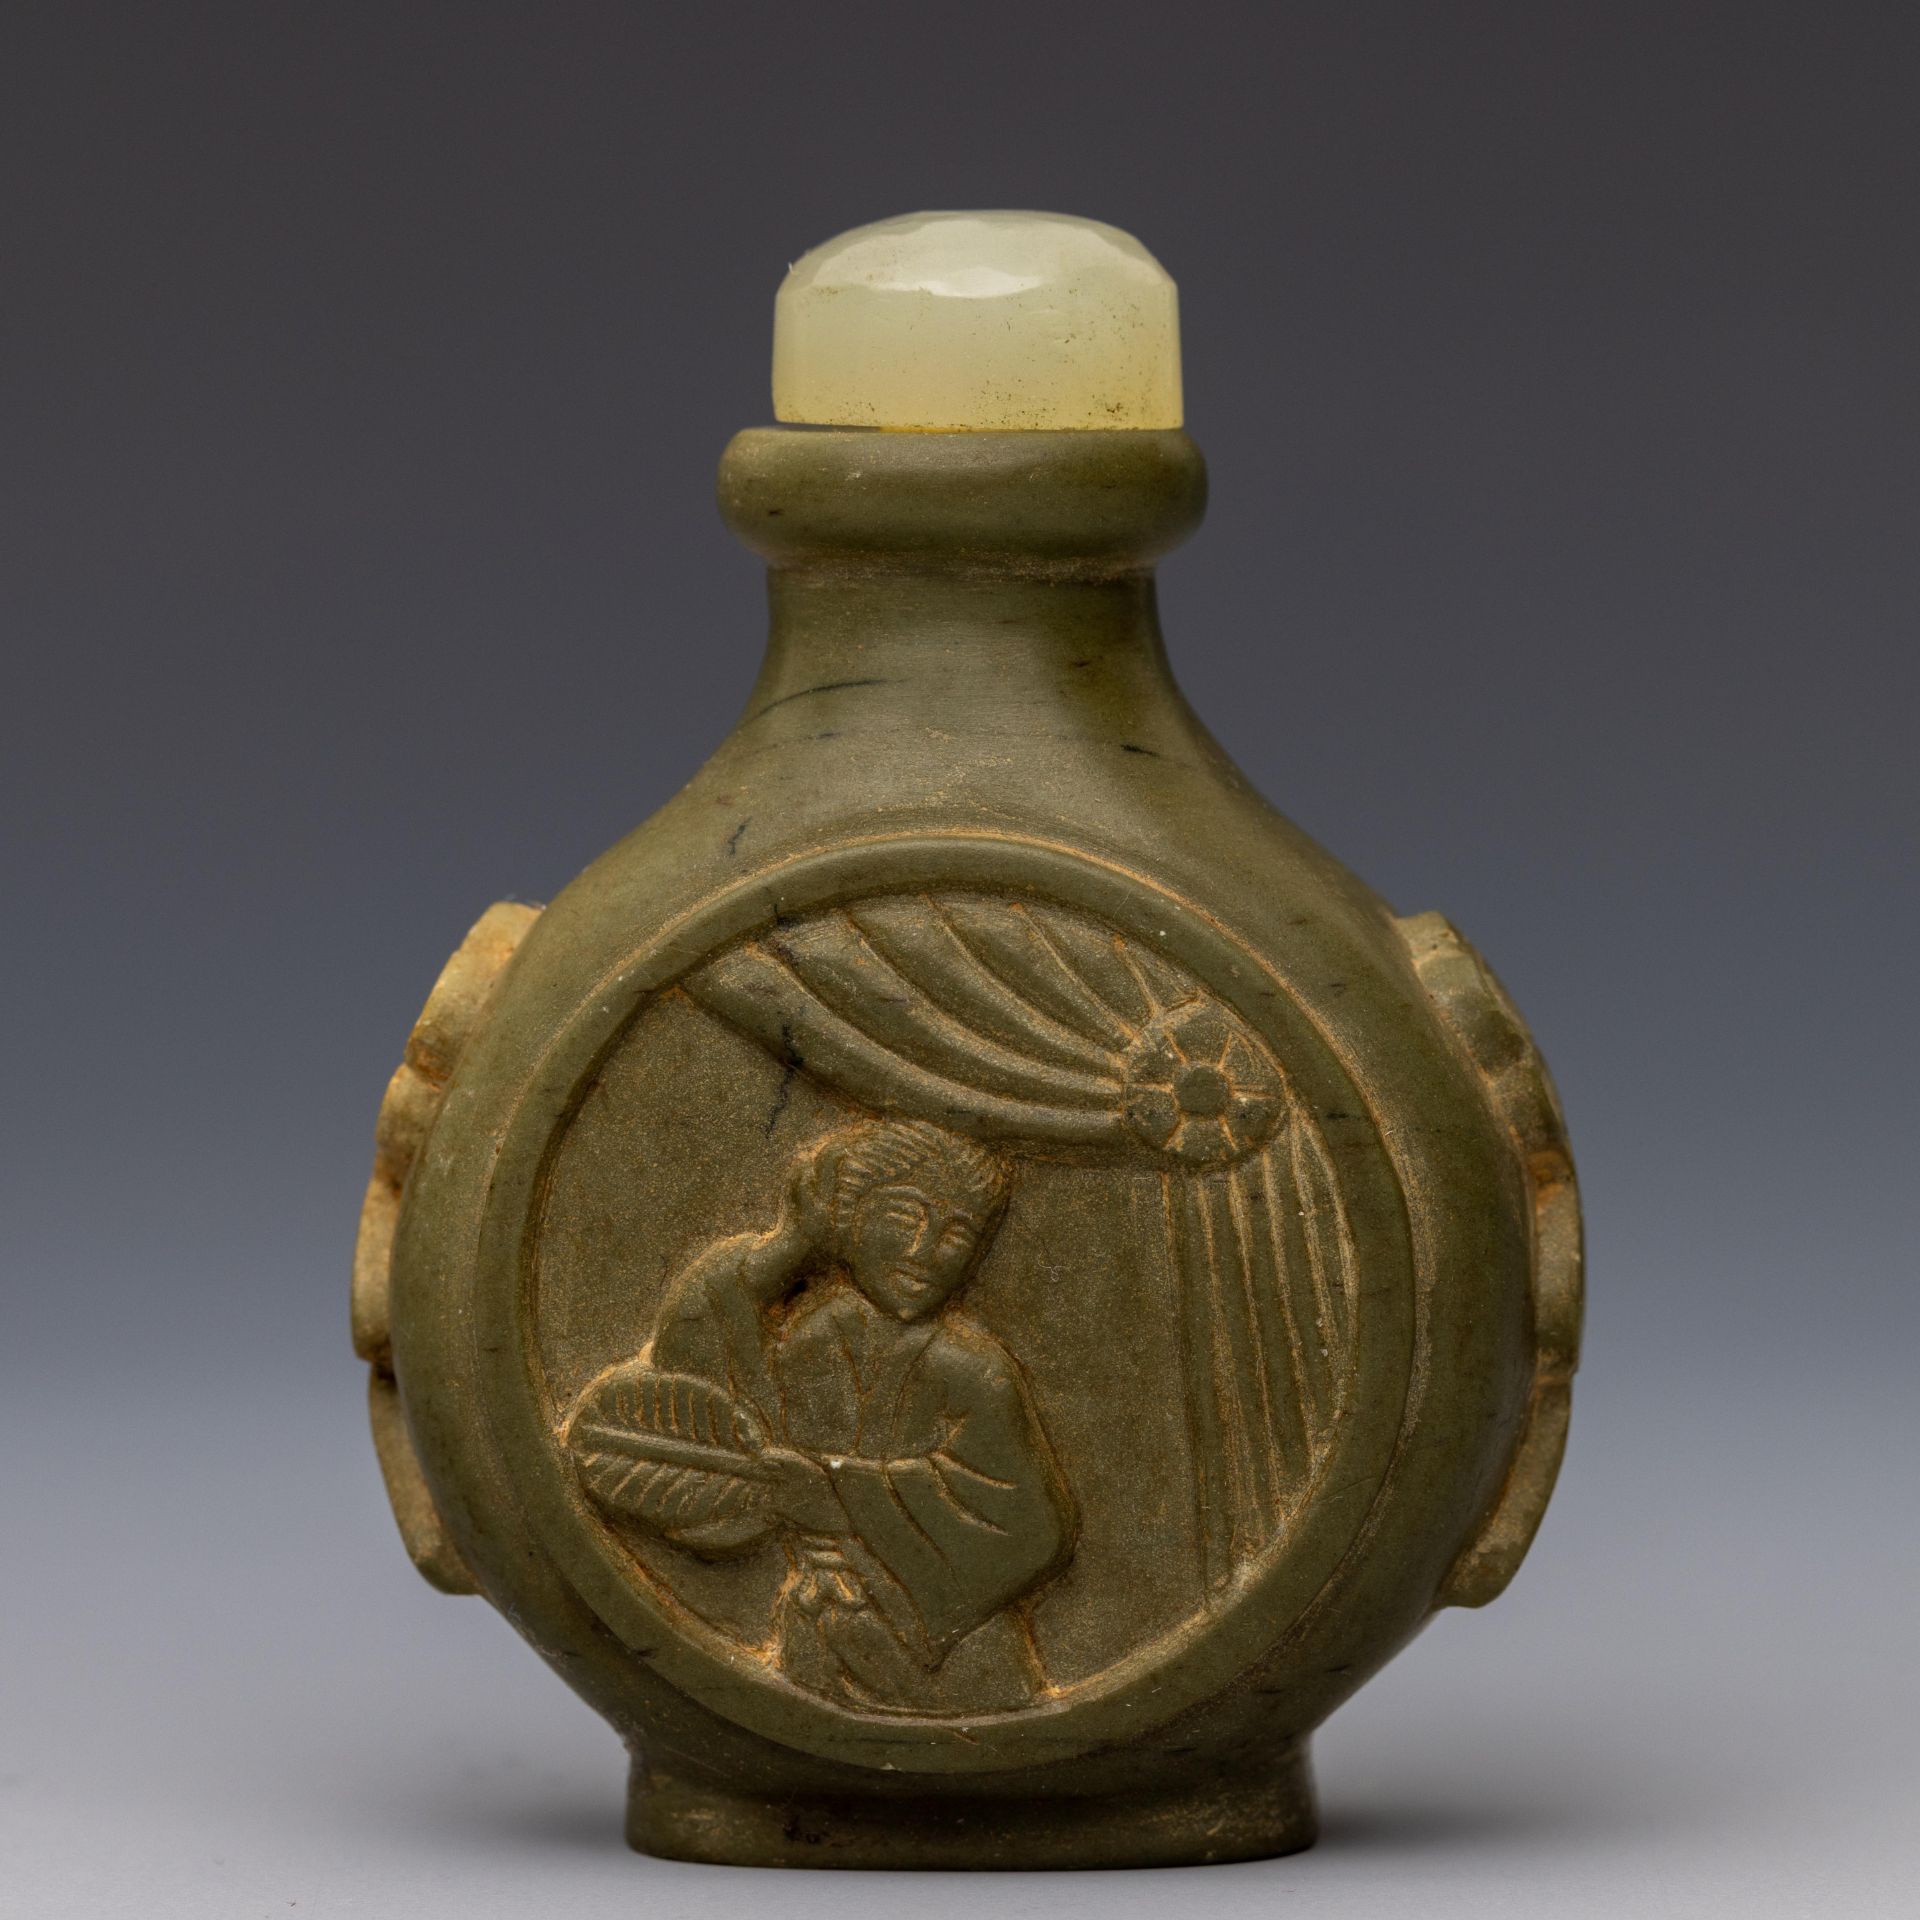 China, a zisha Yixing snuff bottle and stopper, late Qing dynasty (1644-1912)